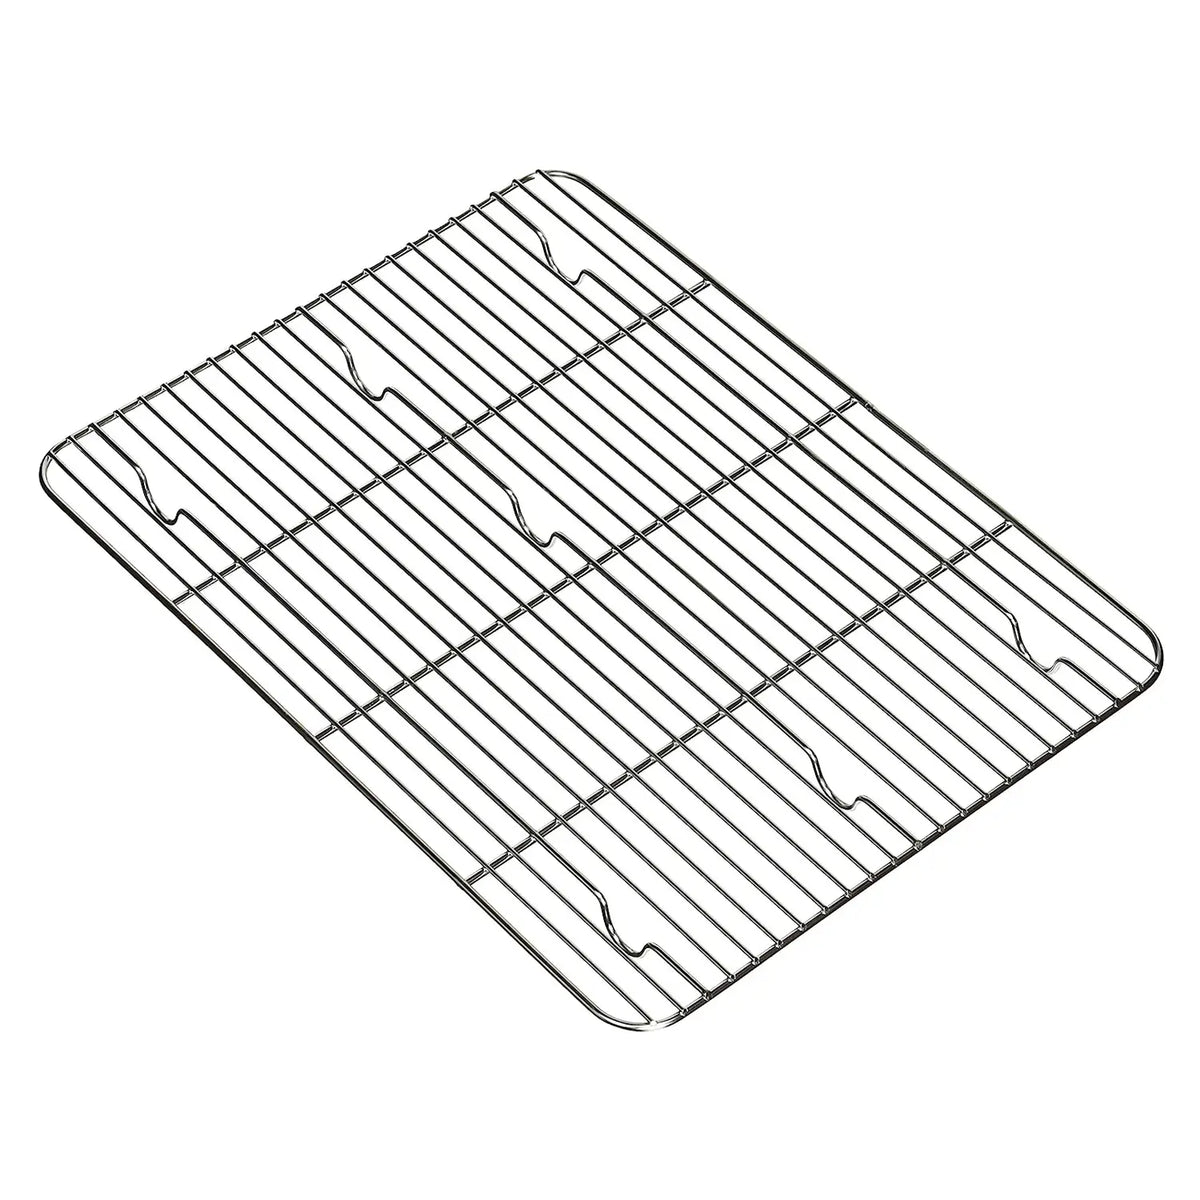 SHINDO Stainless Steel Fine Mesh Cooling Rack